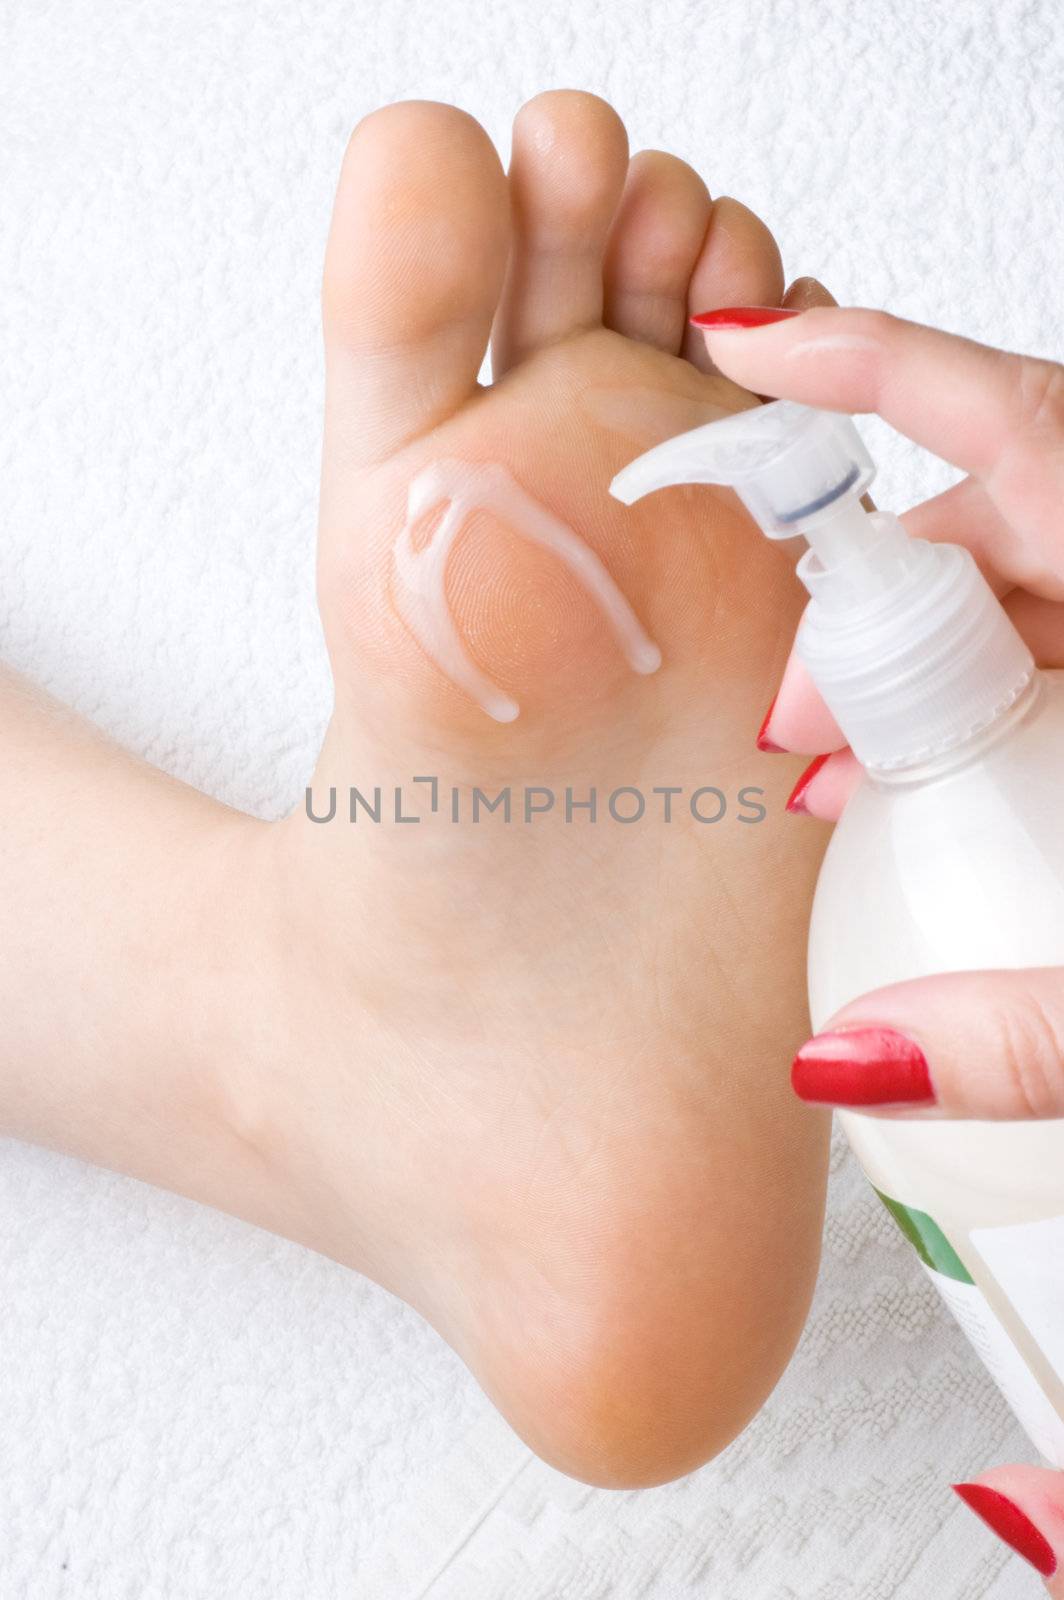 pedicure, applying the cream to soften and moisturize